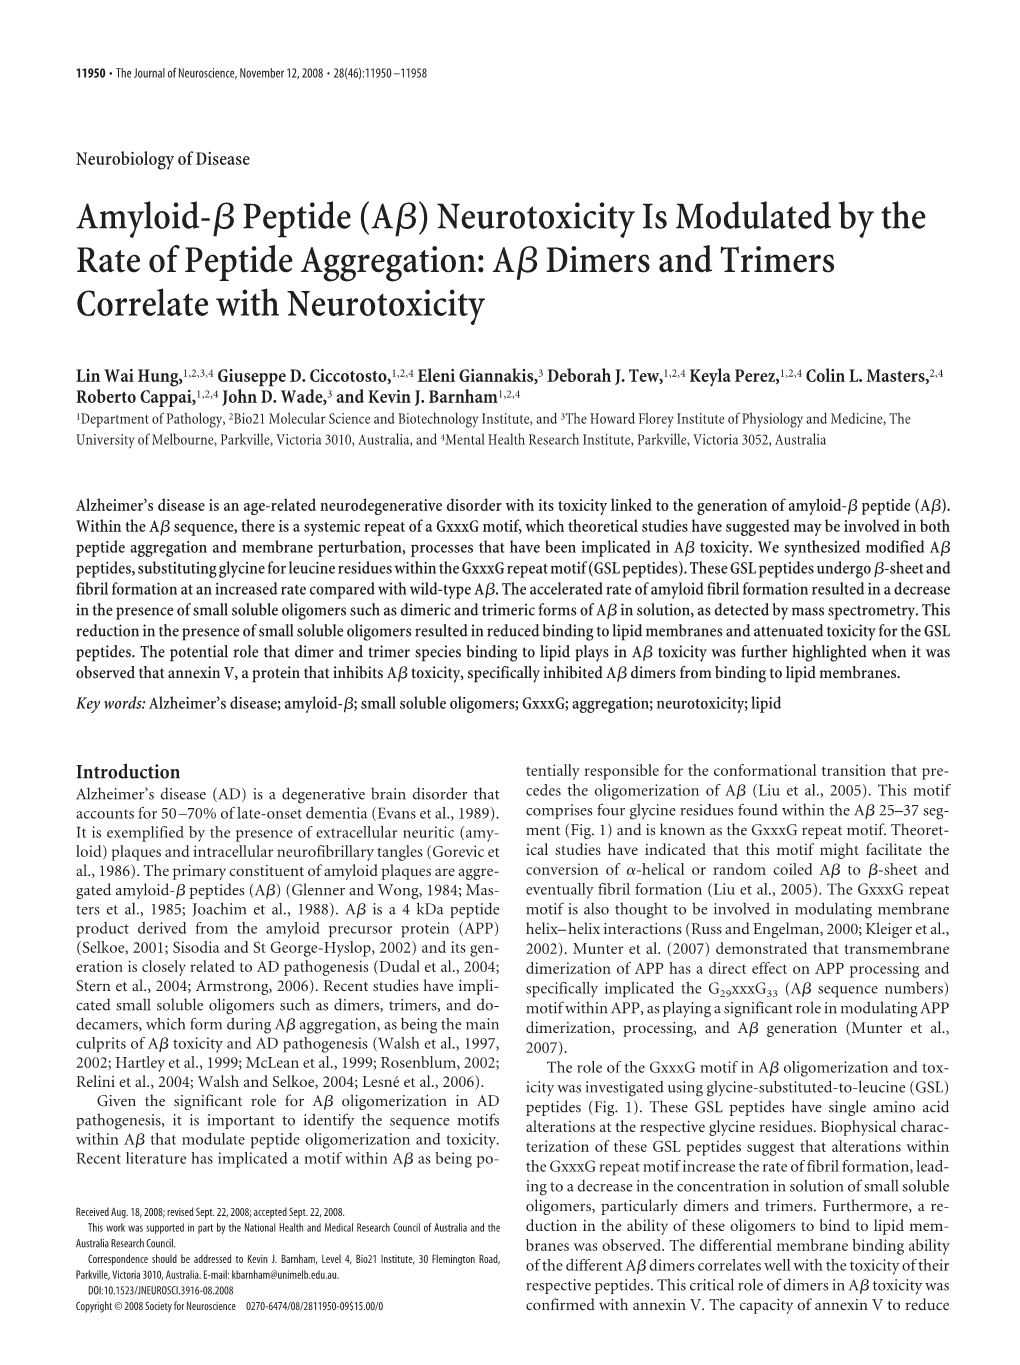 Amyloid-Яpeptide (AЯ) Neurotoxicity Is Modulated by the Rate of Peptide